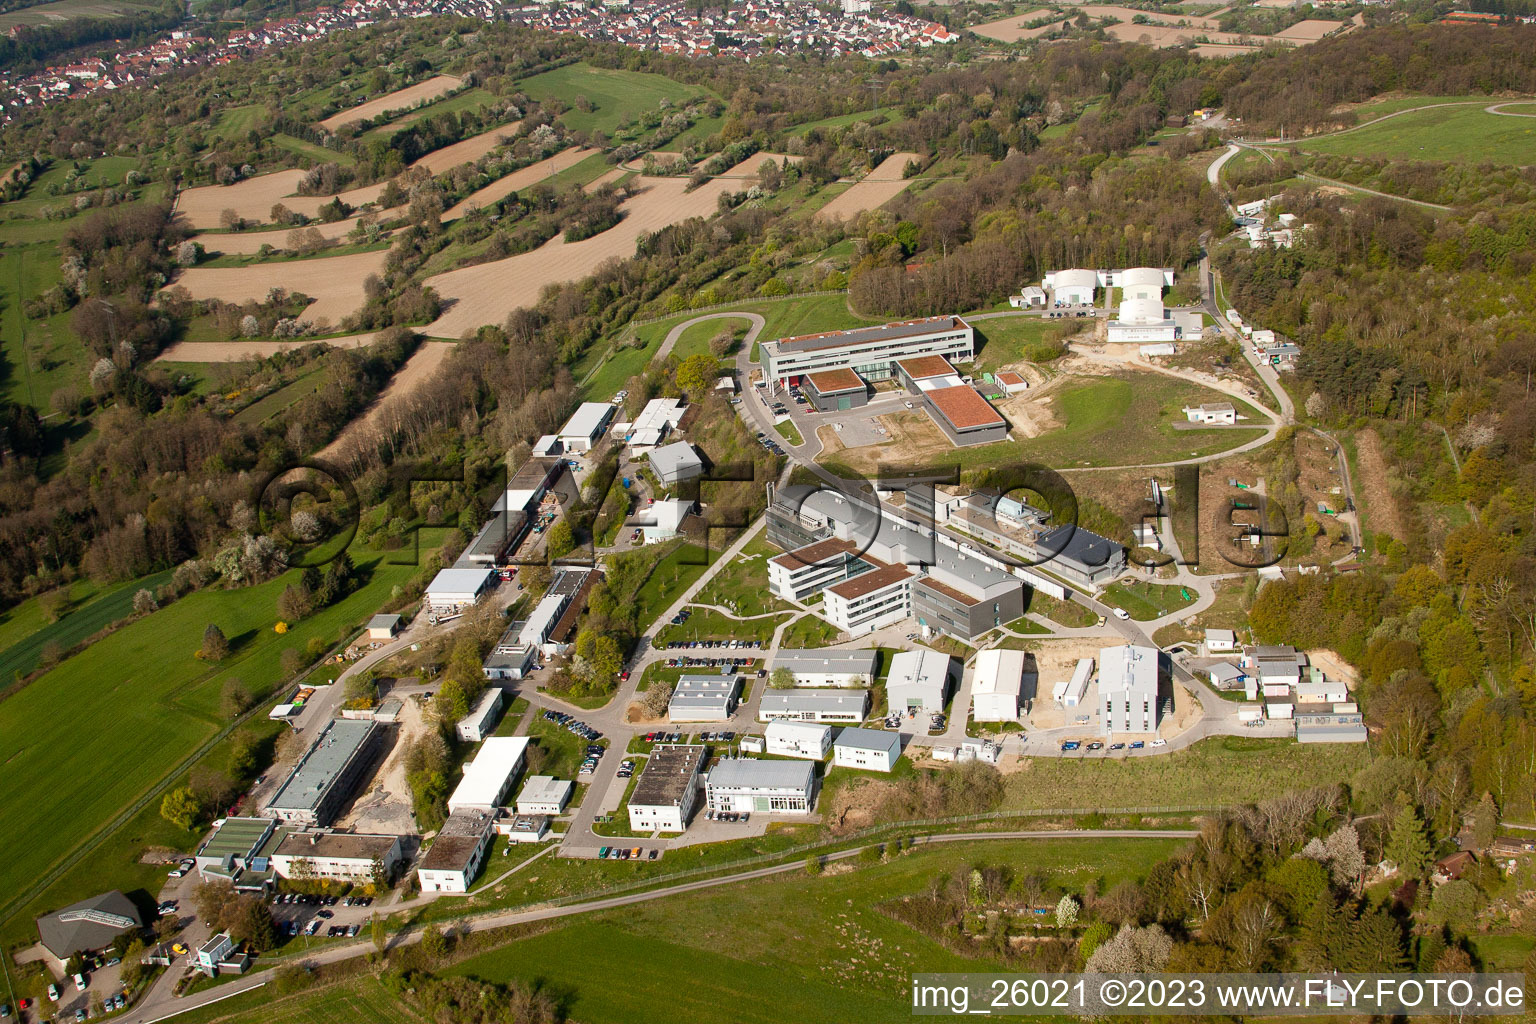 Bird's eye view of Fraunhofer Institute for Chemical Technology (ICT) in the district Berghausen in Pfinztal in the state Baden-Wuerttemberg, Germany